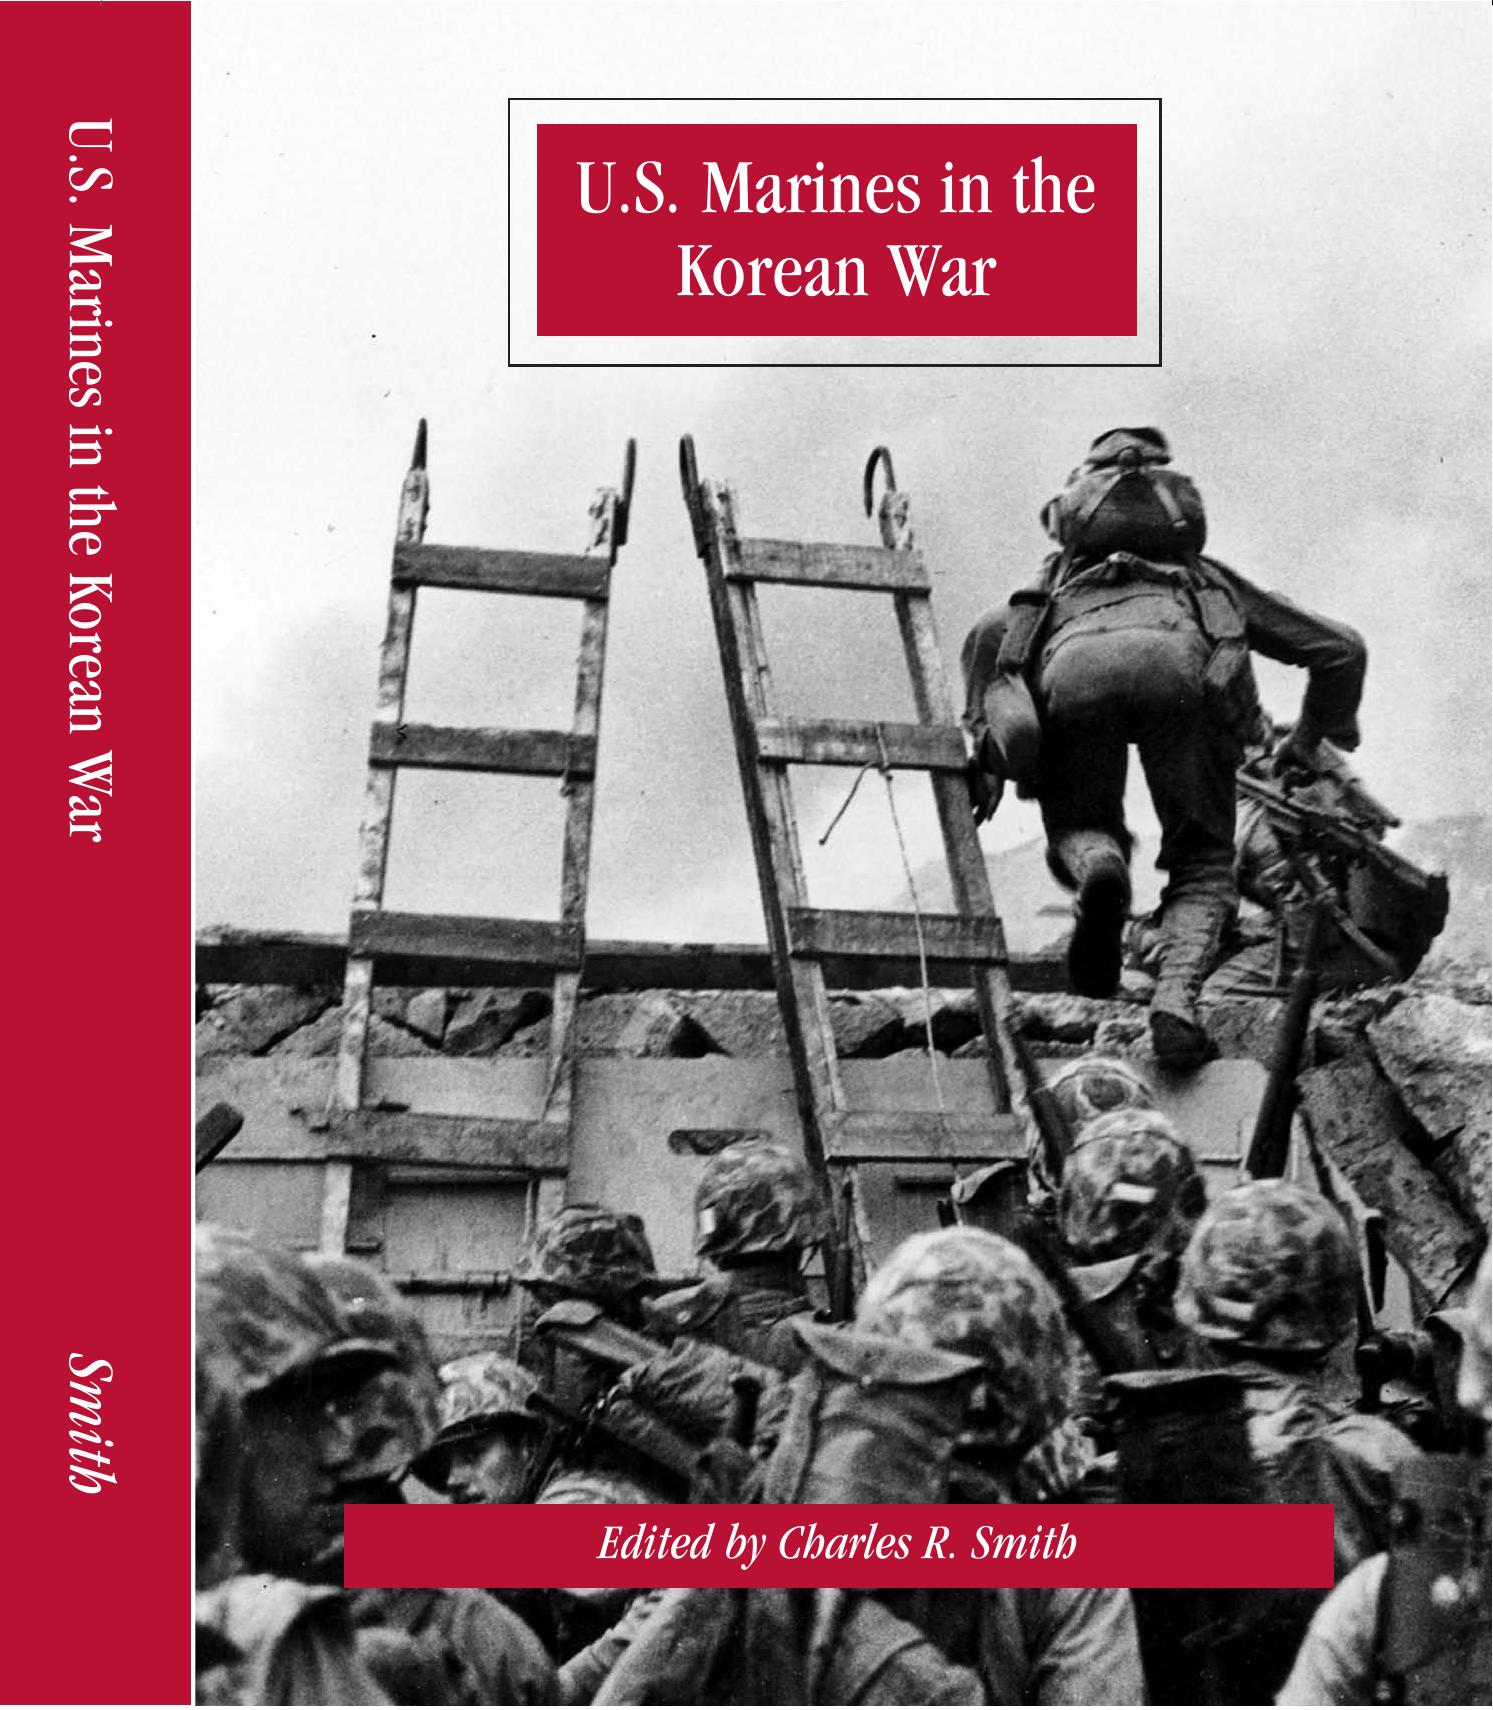 U.S. Marines in the Korean War by Charles R. Smith